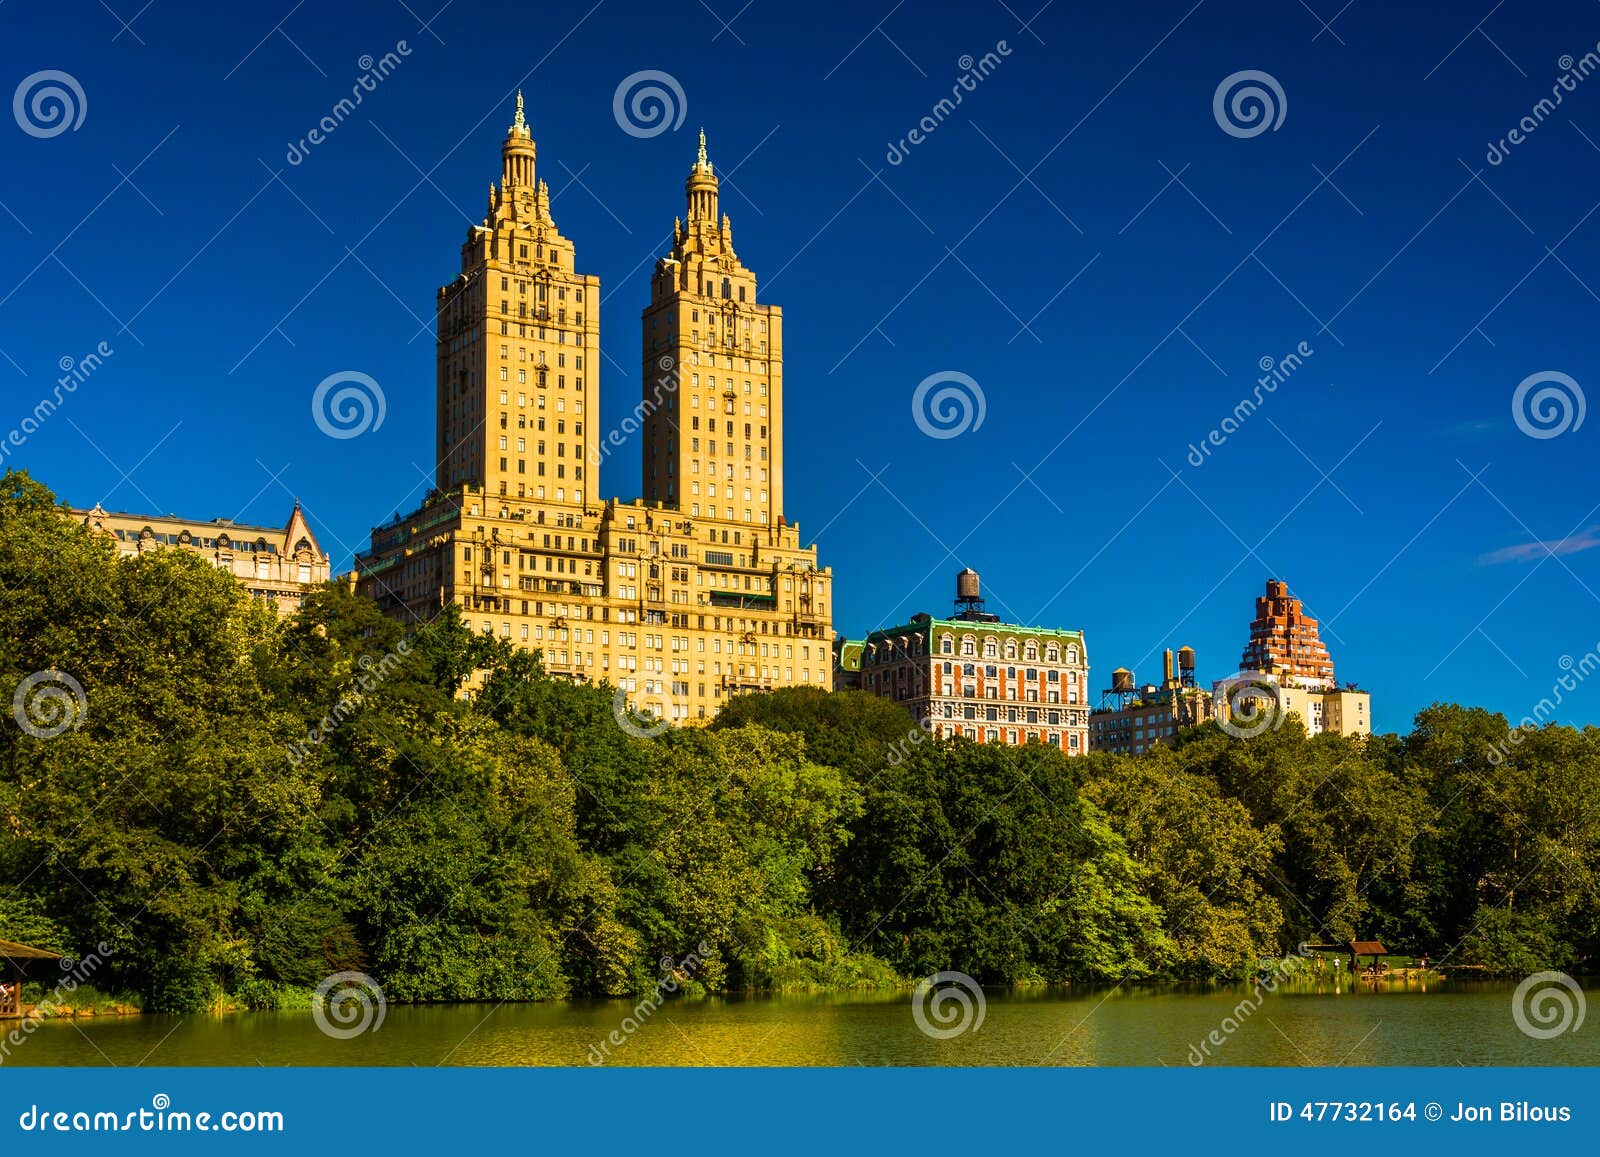 the san remo and the lake seen at central park, manhattan, new y